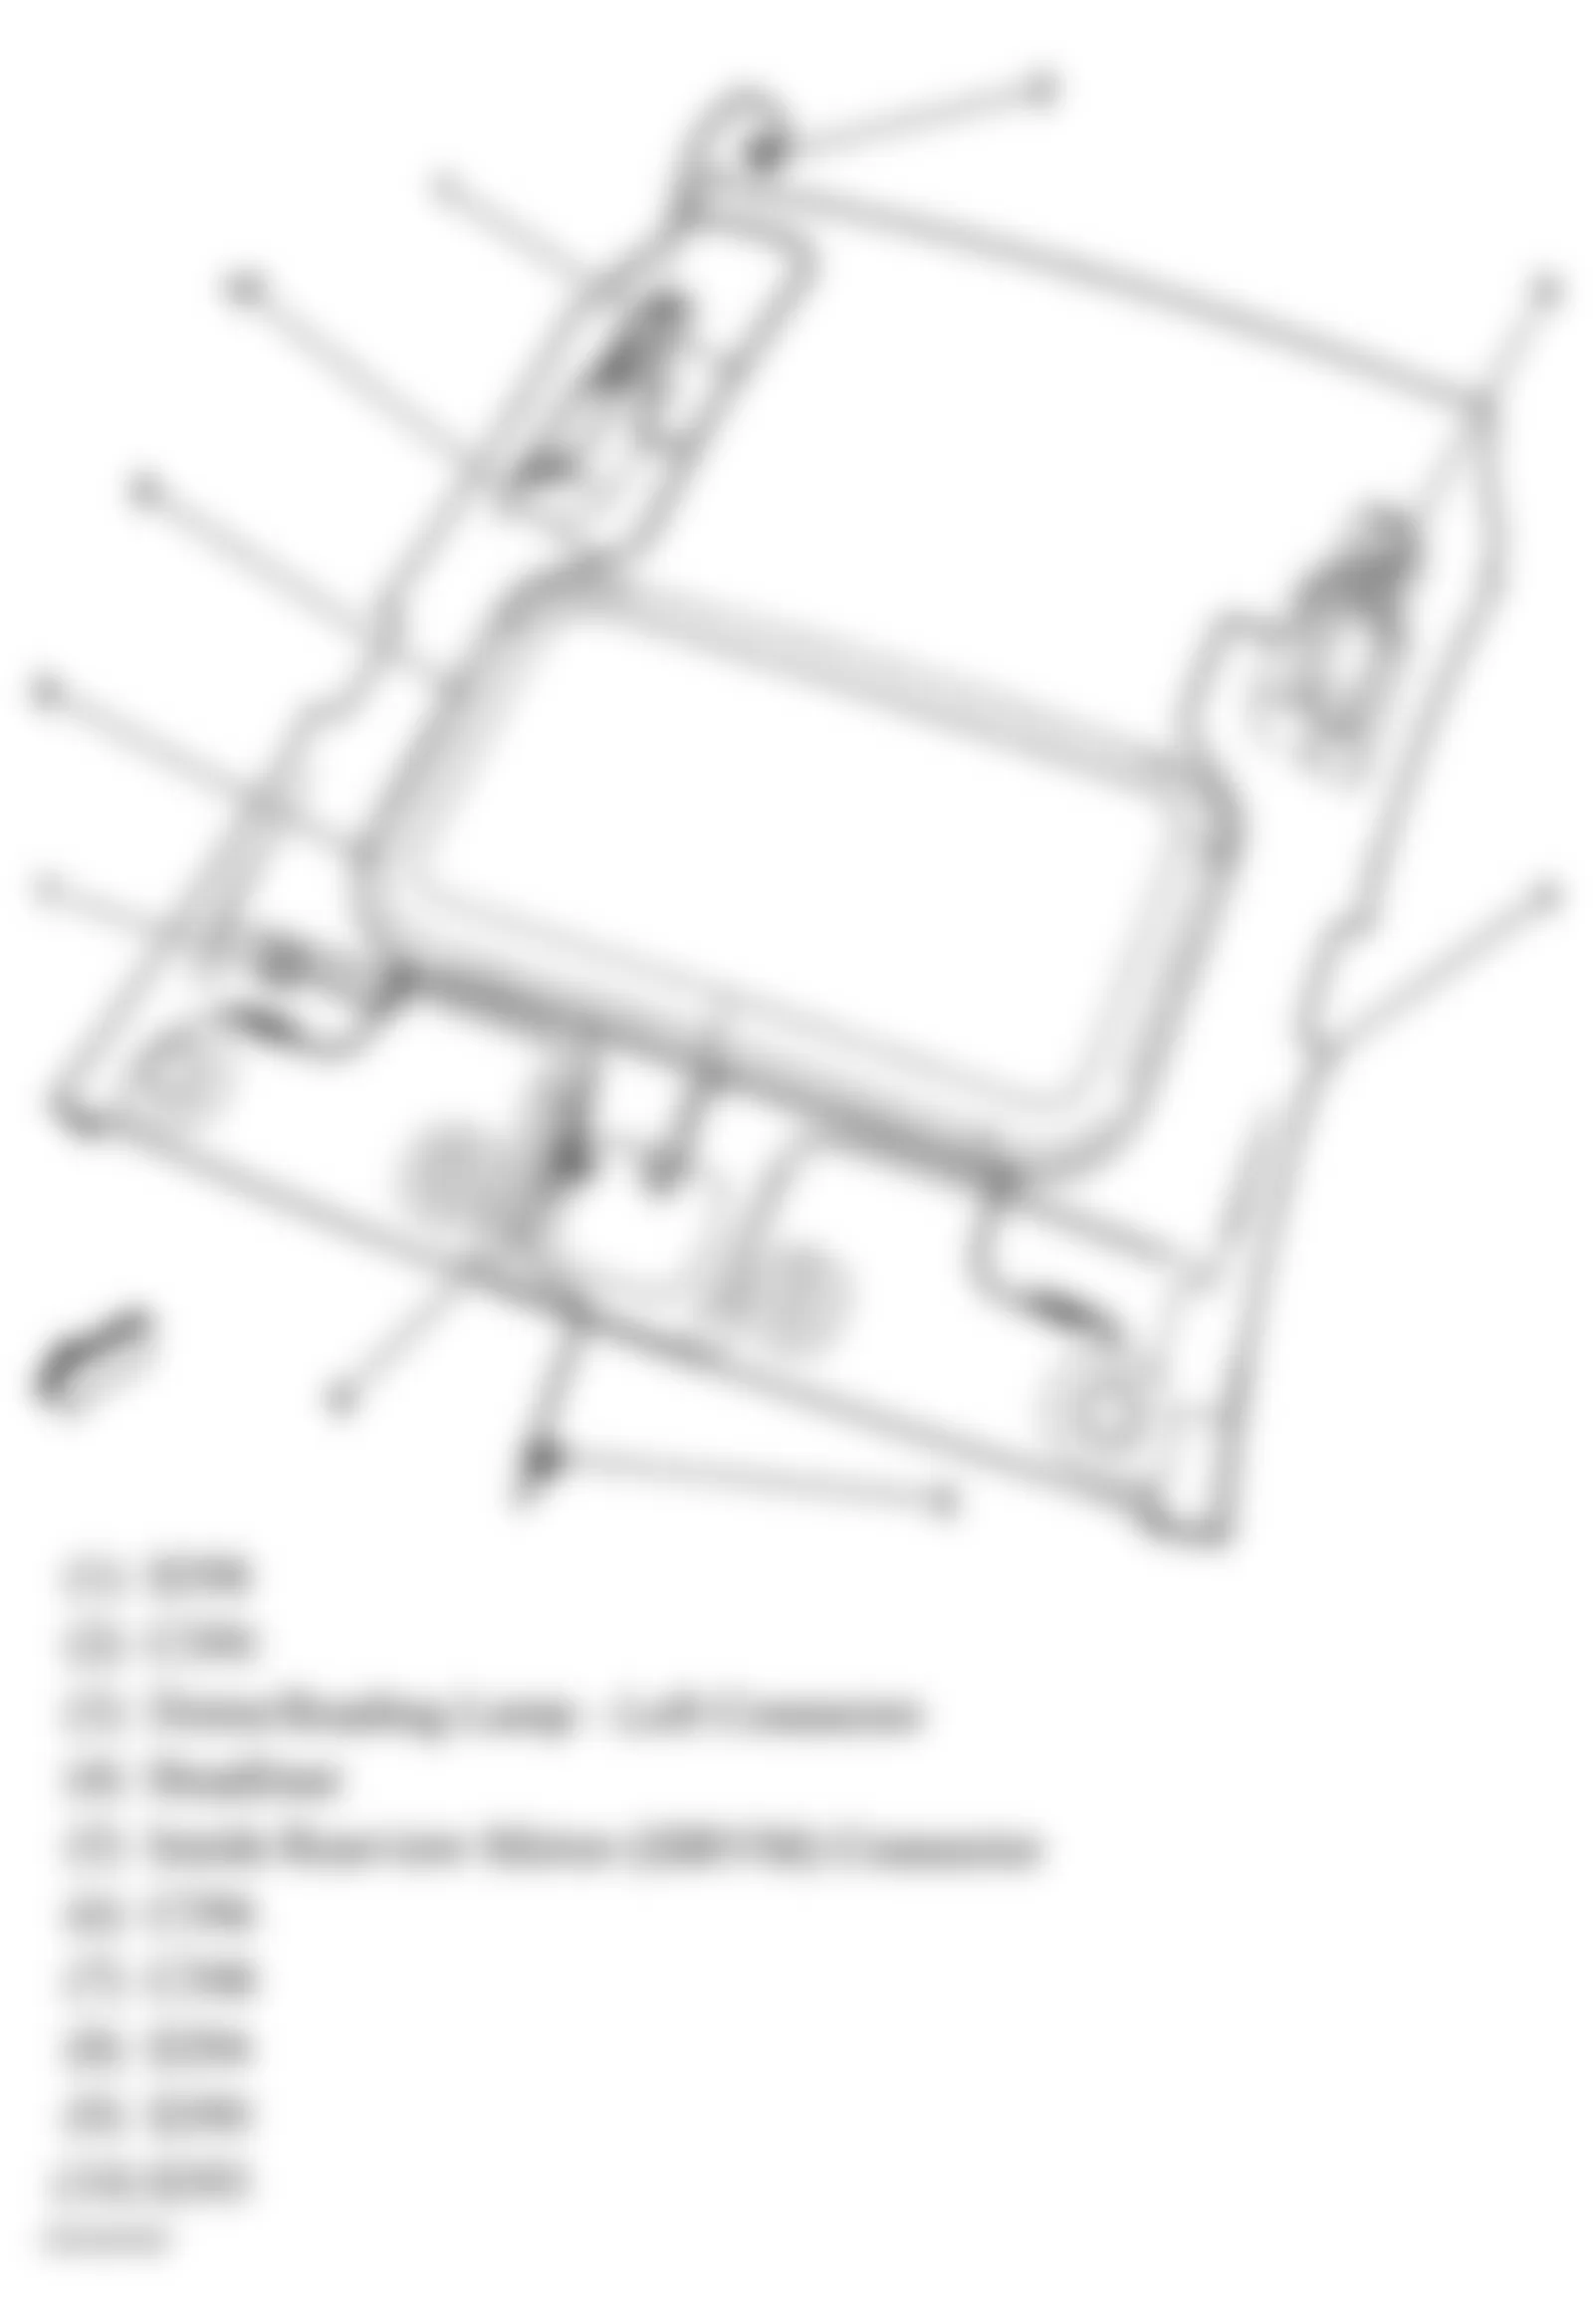 Buick Allure CXL 2005 - Component Locations -  Headliner Assembly